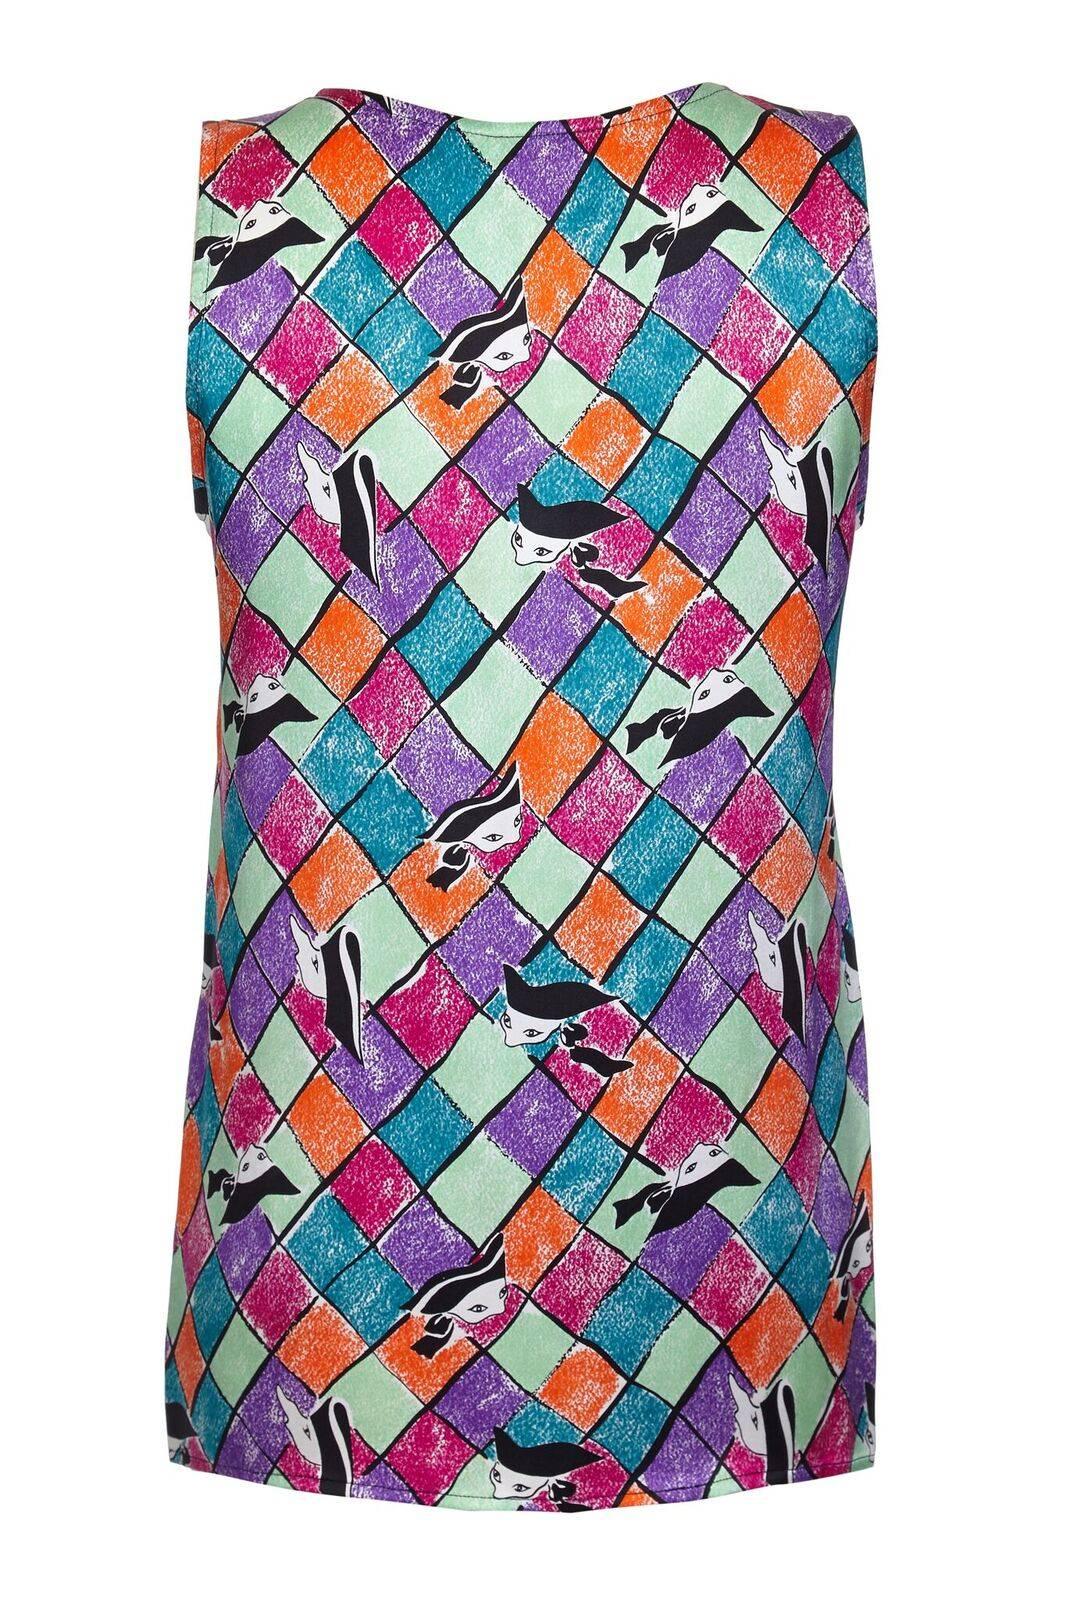 This vibrant and colourful late 1980s early 1990s Yves Saint Laurent silk top is in pristine condition and beautifully cut. The playful abstracted harlequin print in dark pink, purple, orange, mint green and turquoise give this piece a playful and